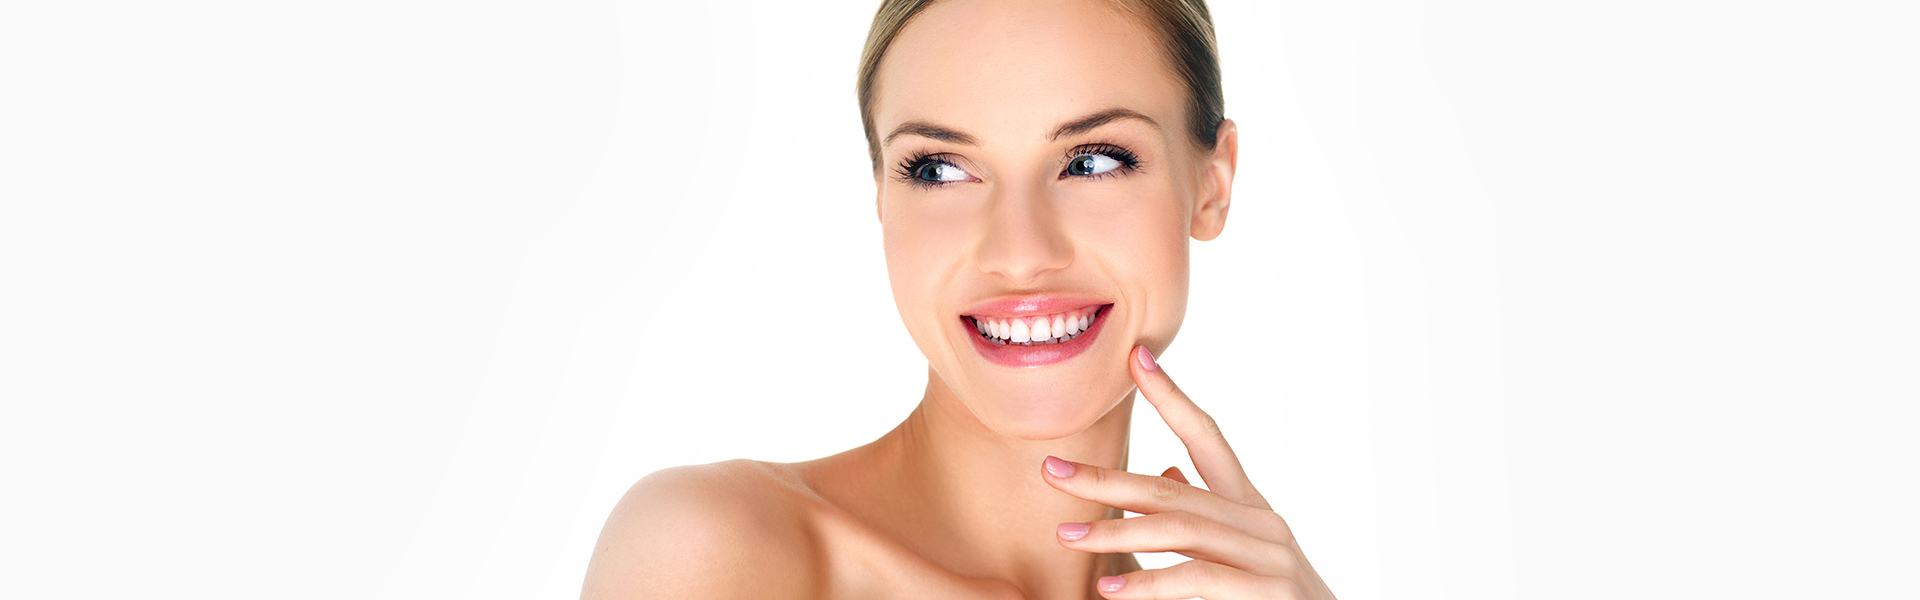 The Benefits of Cosmetic Dentistry Explained